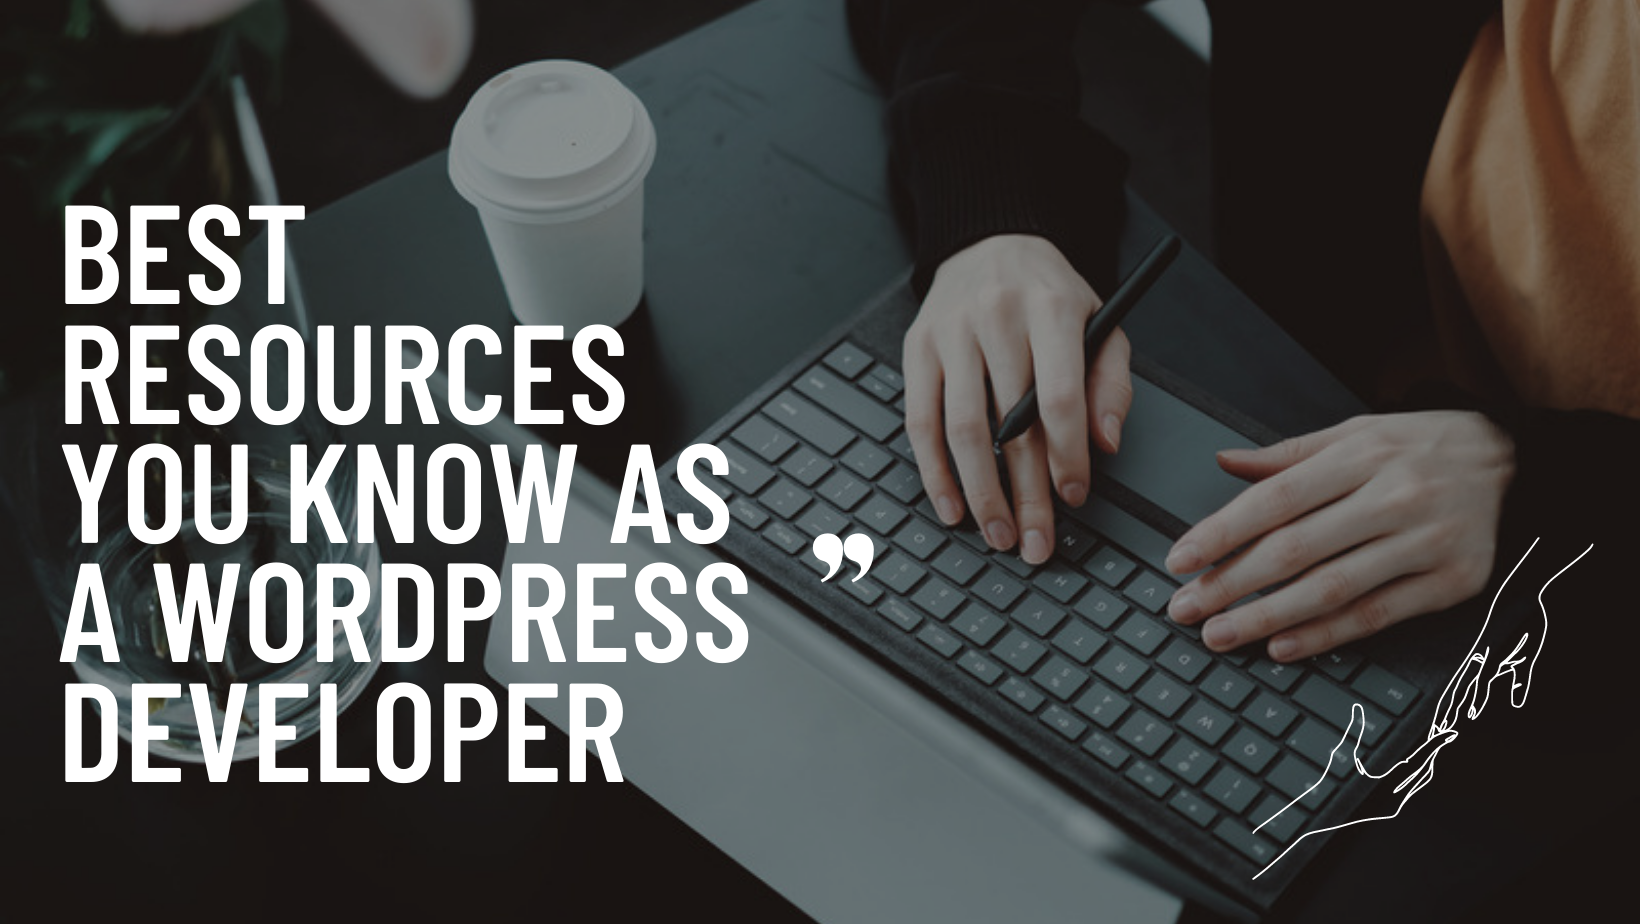 Best Resources You Know as a WordPress Developer